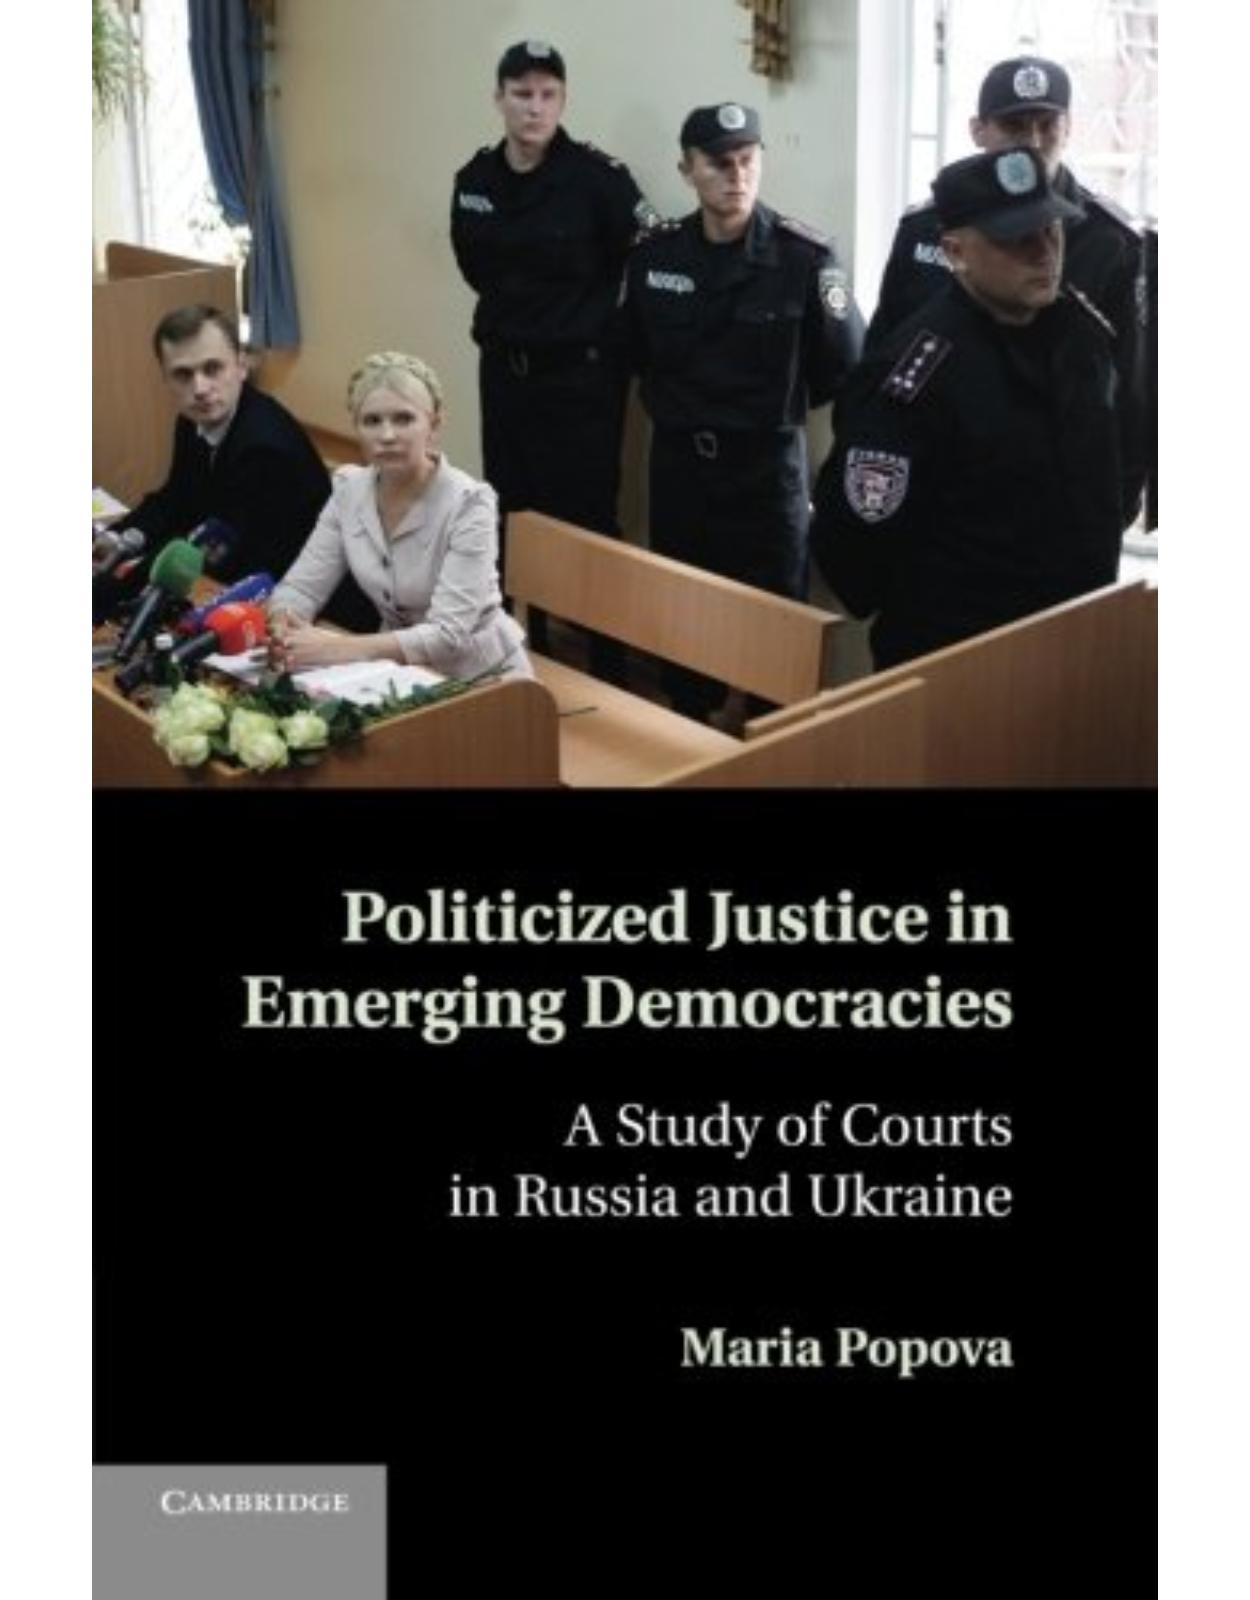 Politicized Justice in Emerging Democracies: A Study of Courts in Russia and Ukraine